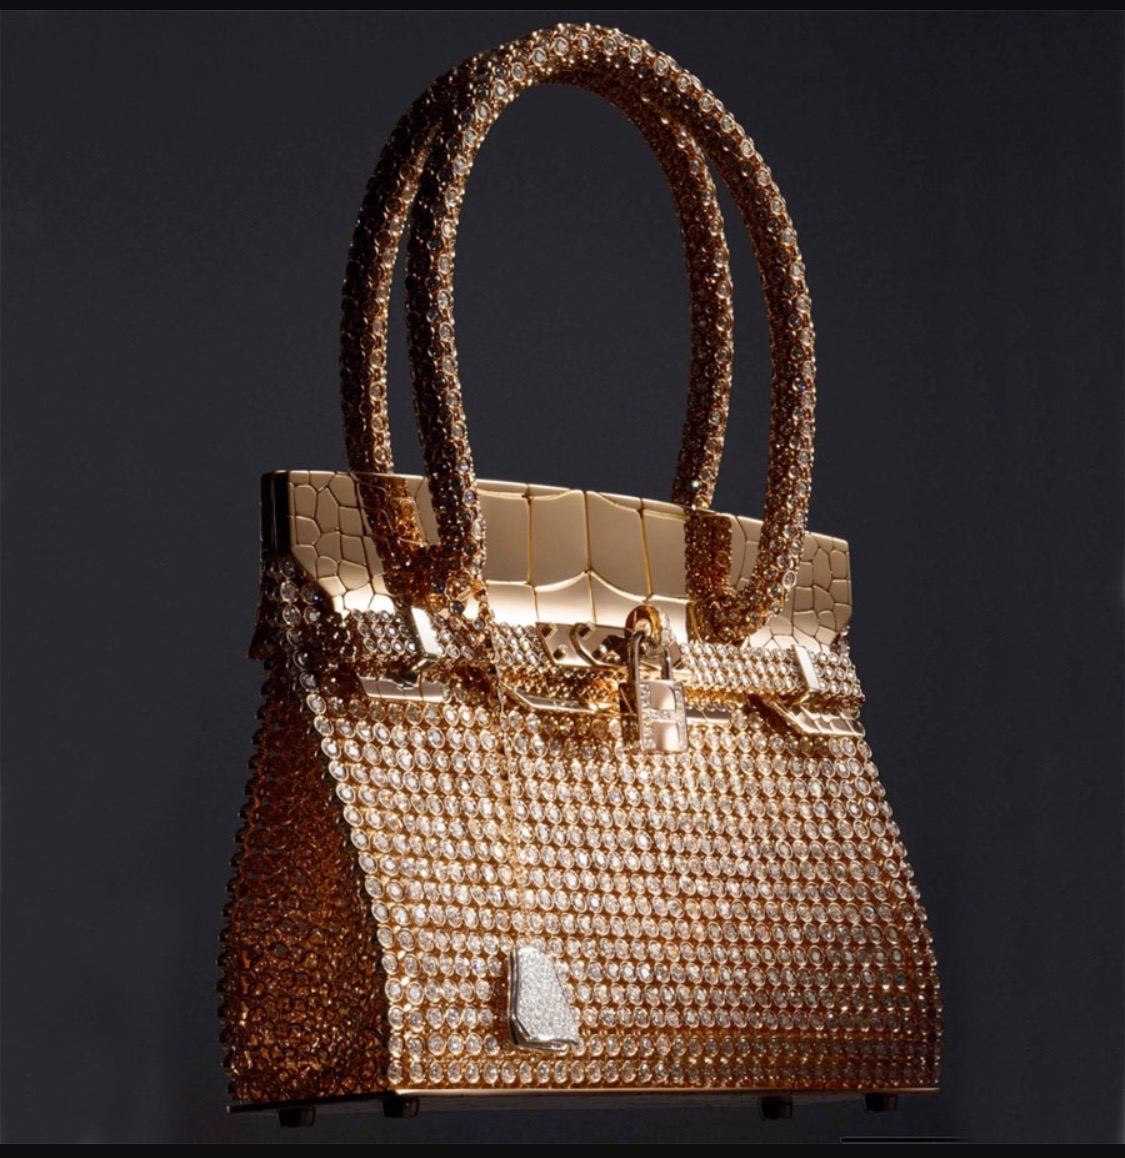 most expensive handbag in the world